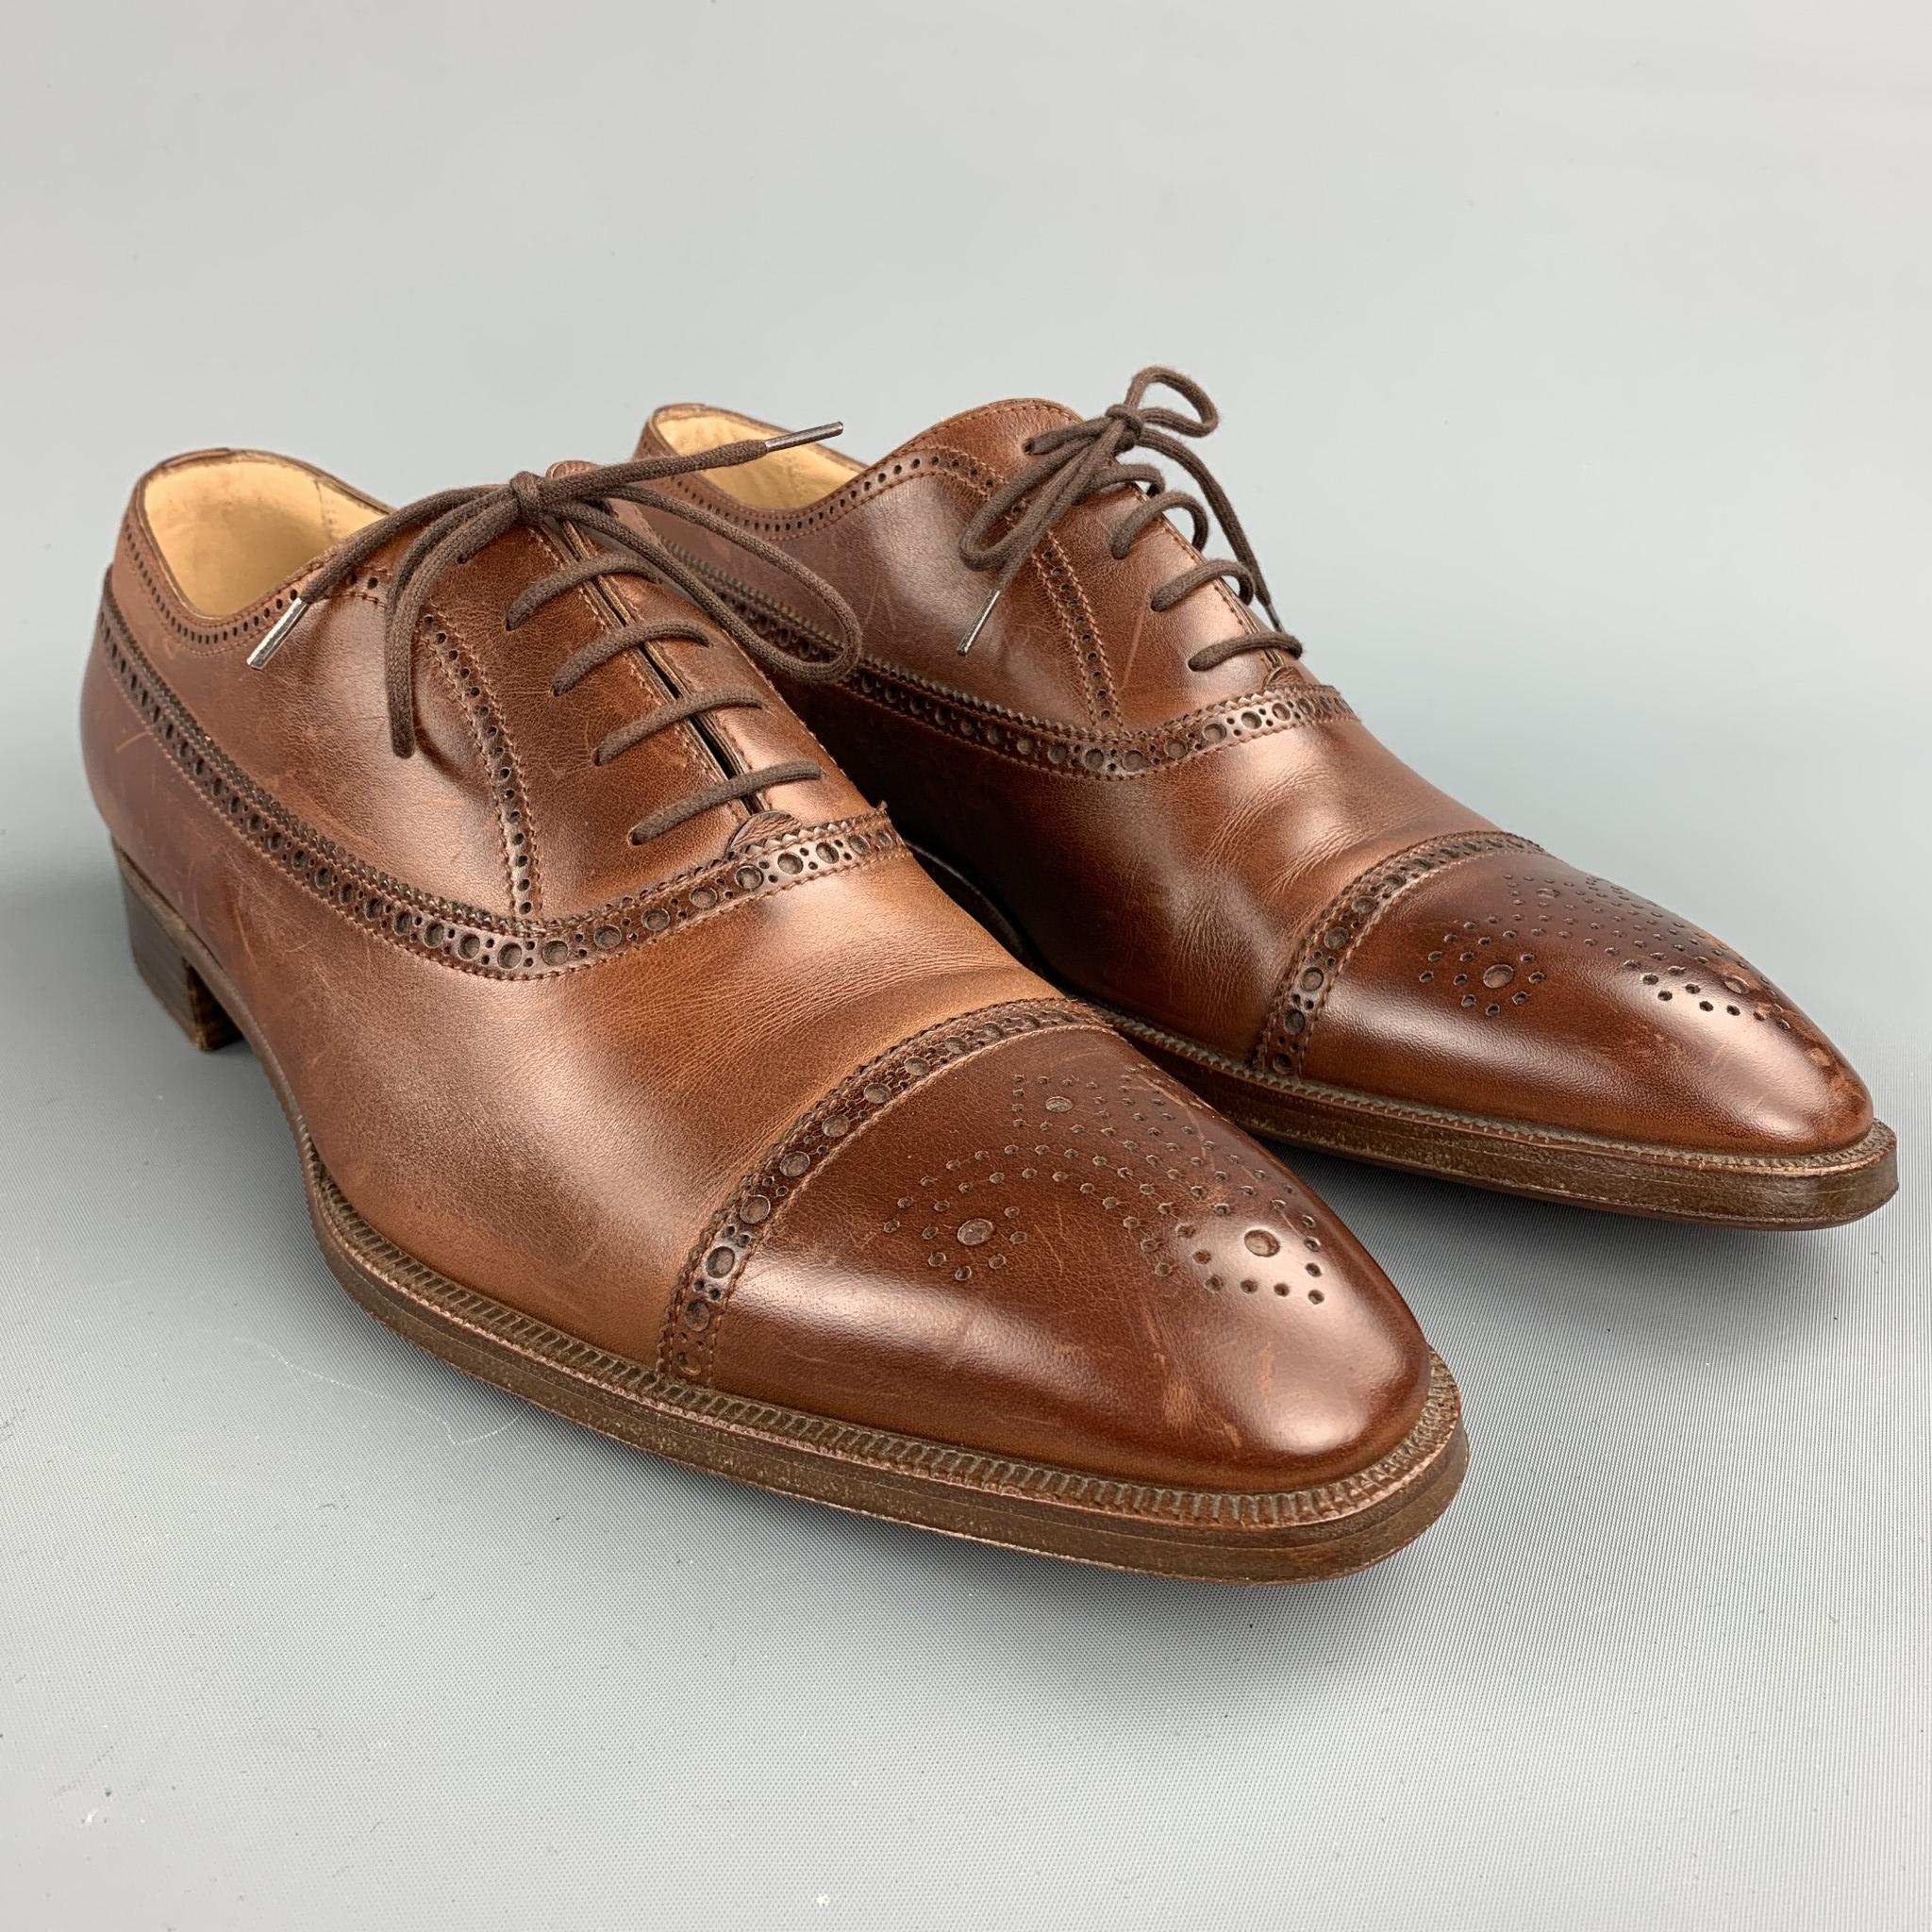 GRAVATI per WILSON AND DEAN for WILKES BASHFORD lace up shoes comes in a brown perforated leather featuring a cap toe and a wooden sole. Made in Italy.

Excellent Pre-Owned Condition.
Marked: UK 8.5 M

Outsole:

12 in. x 4 in. 